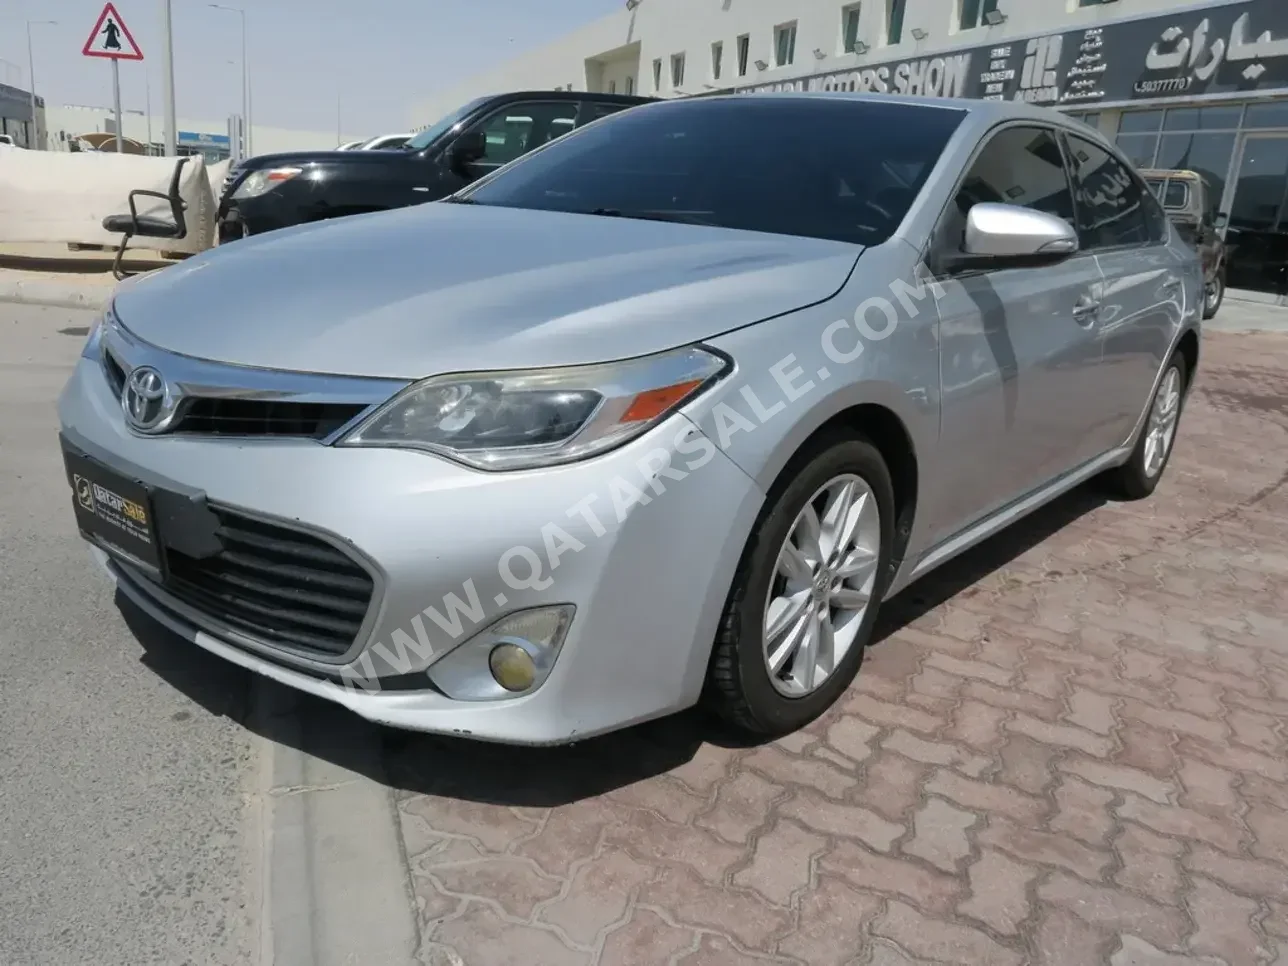 Toyota  Avalon  XLE  2013  Automatic  218,000 Km  6 Cylinder  Front Wheel Drive (FWD)  Sedan  Silver